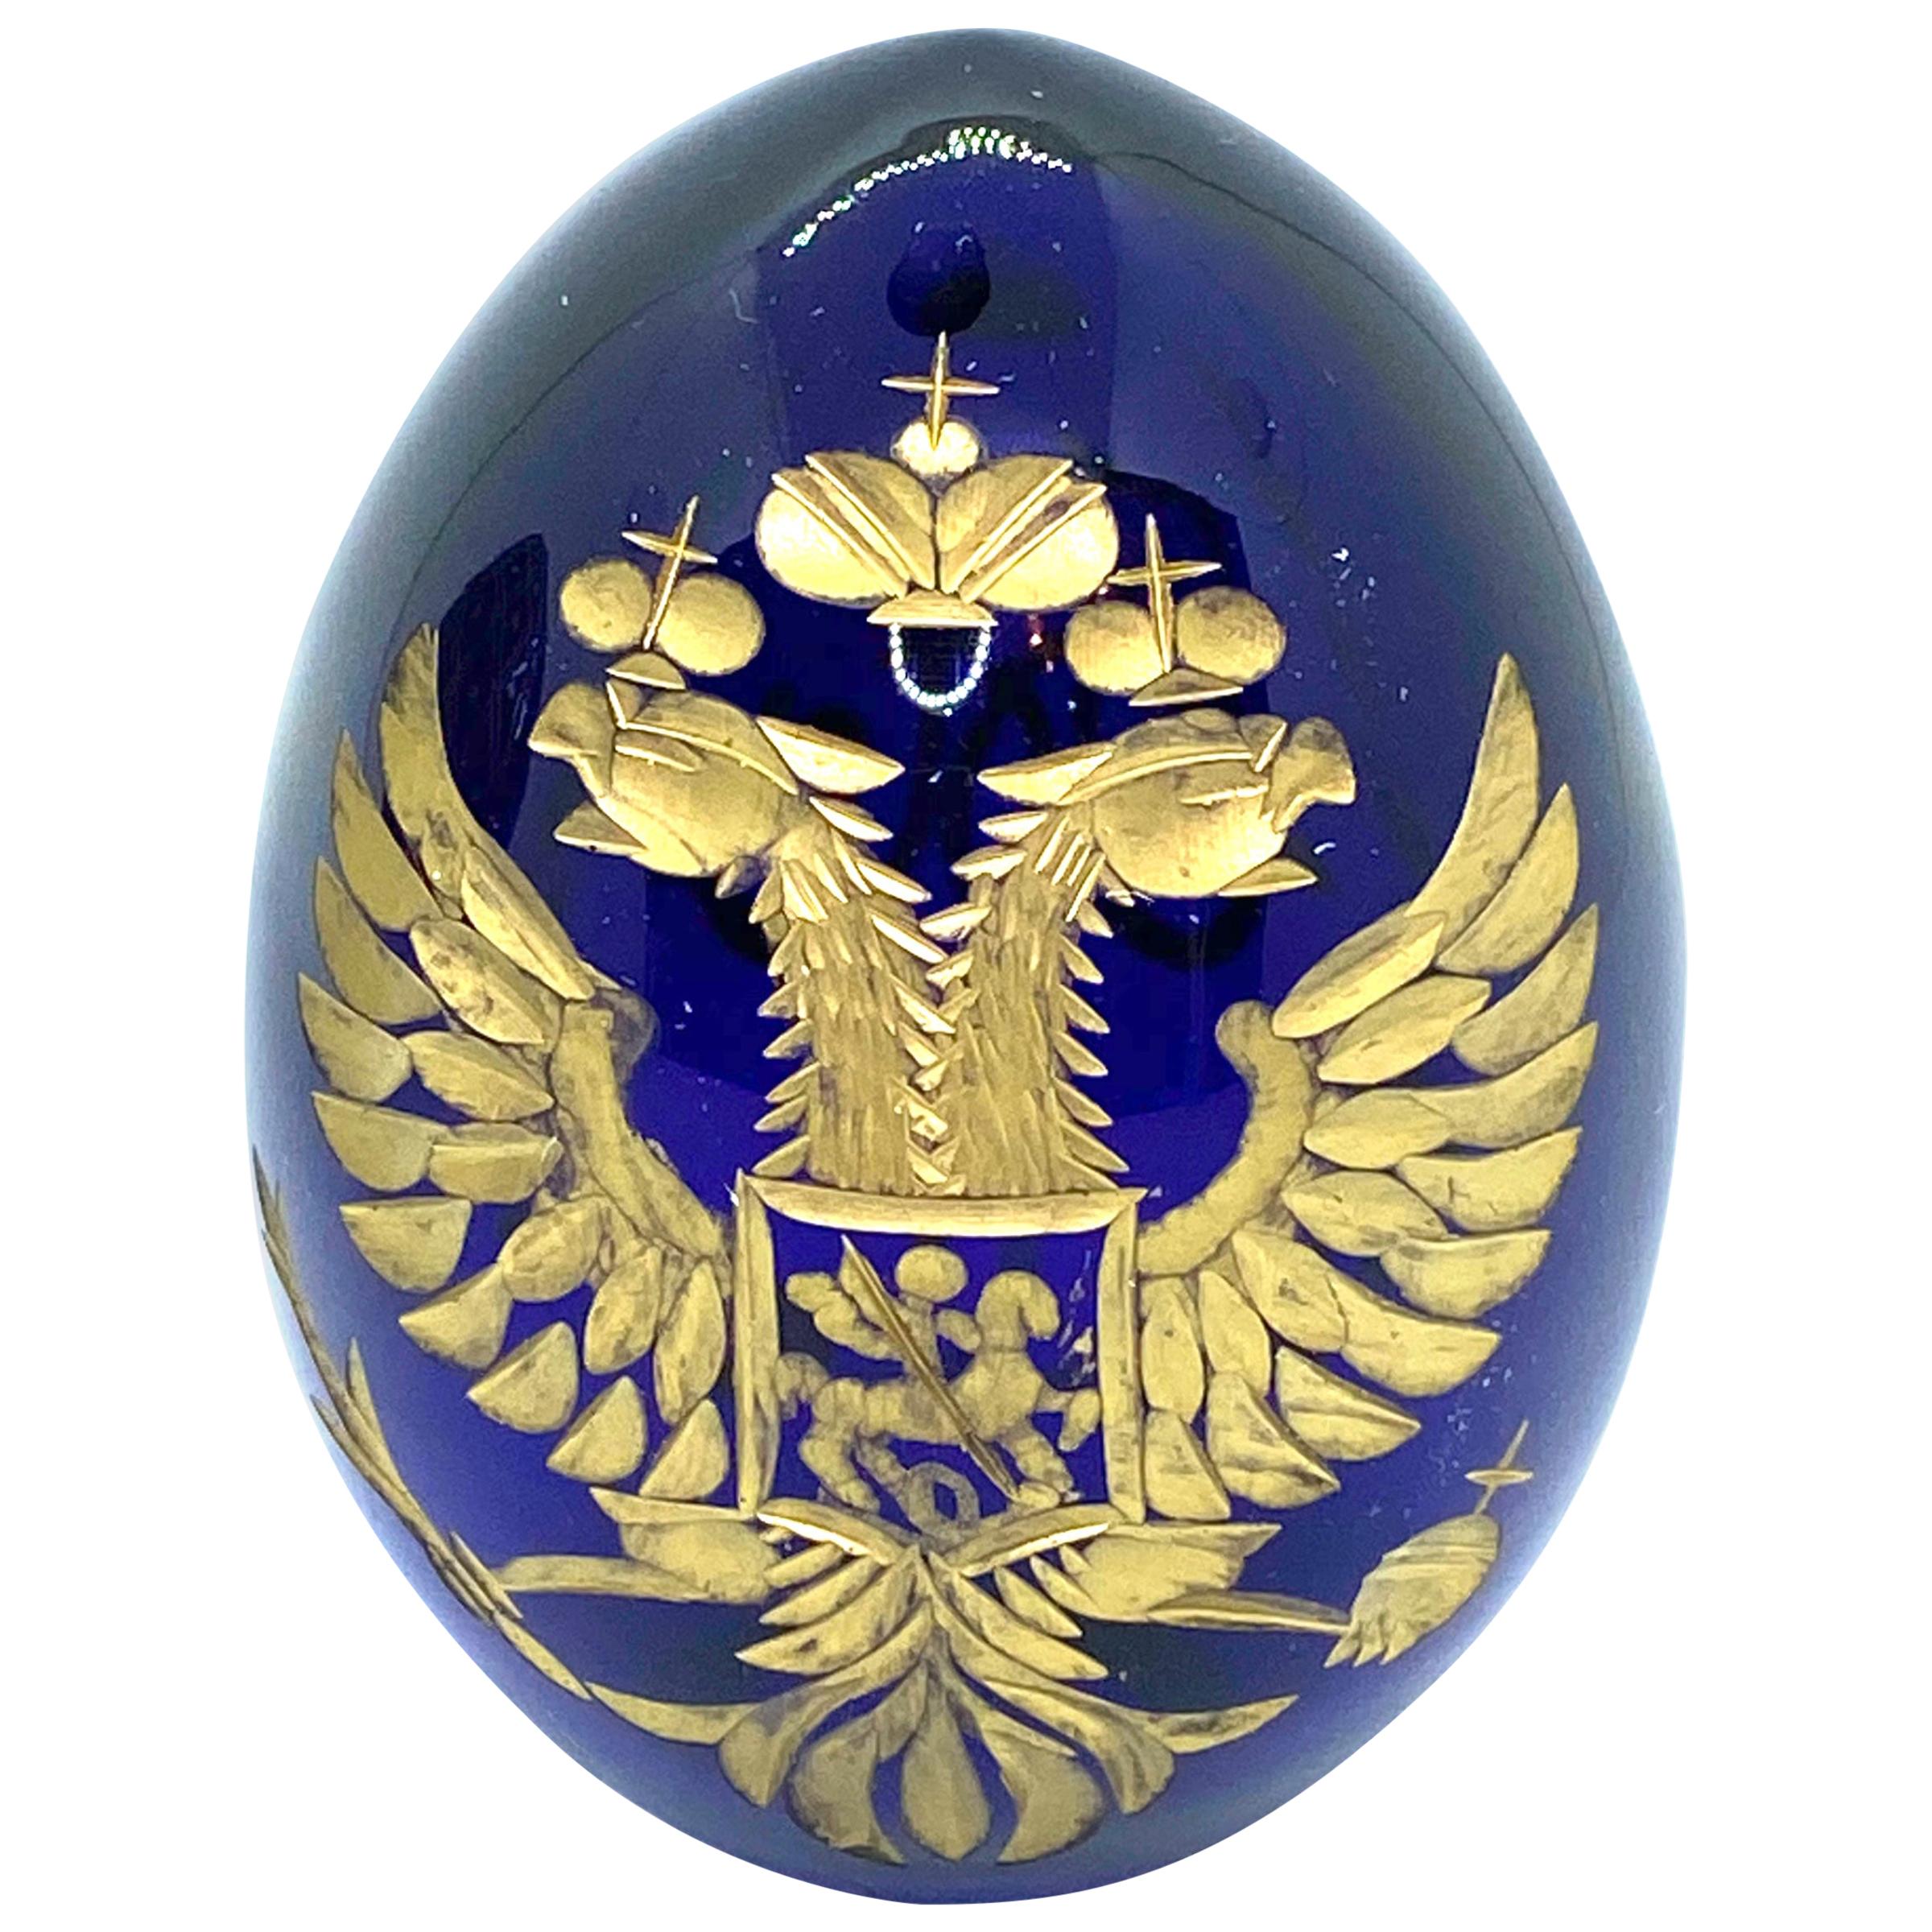 Vintage Faberge Style Russia Glass Egg with Etched Russian Coat of Arms